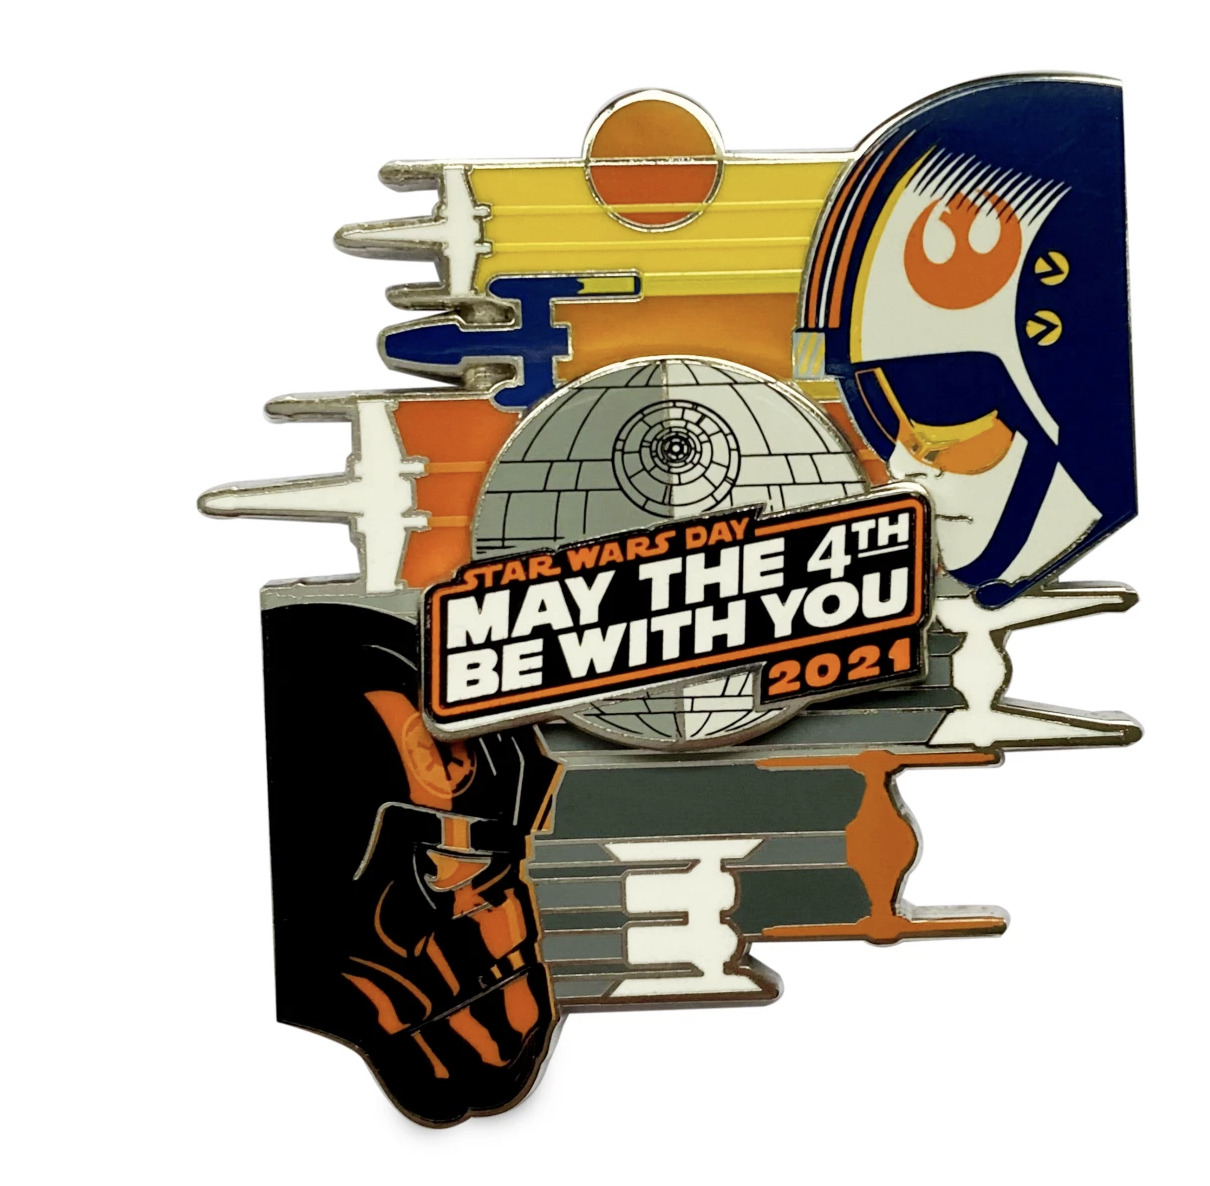 Disney Parks Star Wars Day May the 4th Be With You 2021 Limited Pin New Card